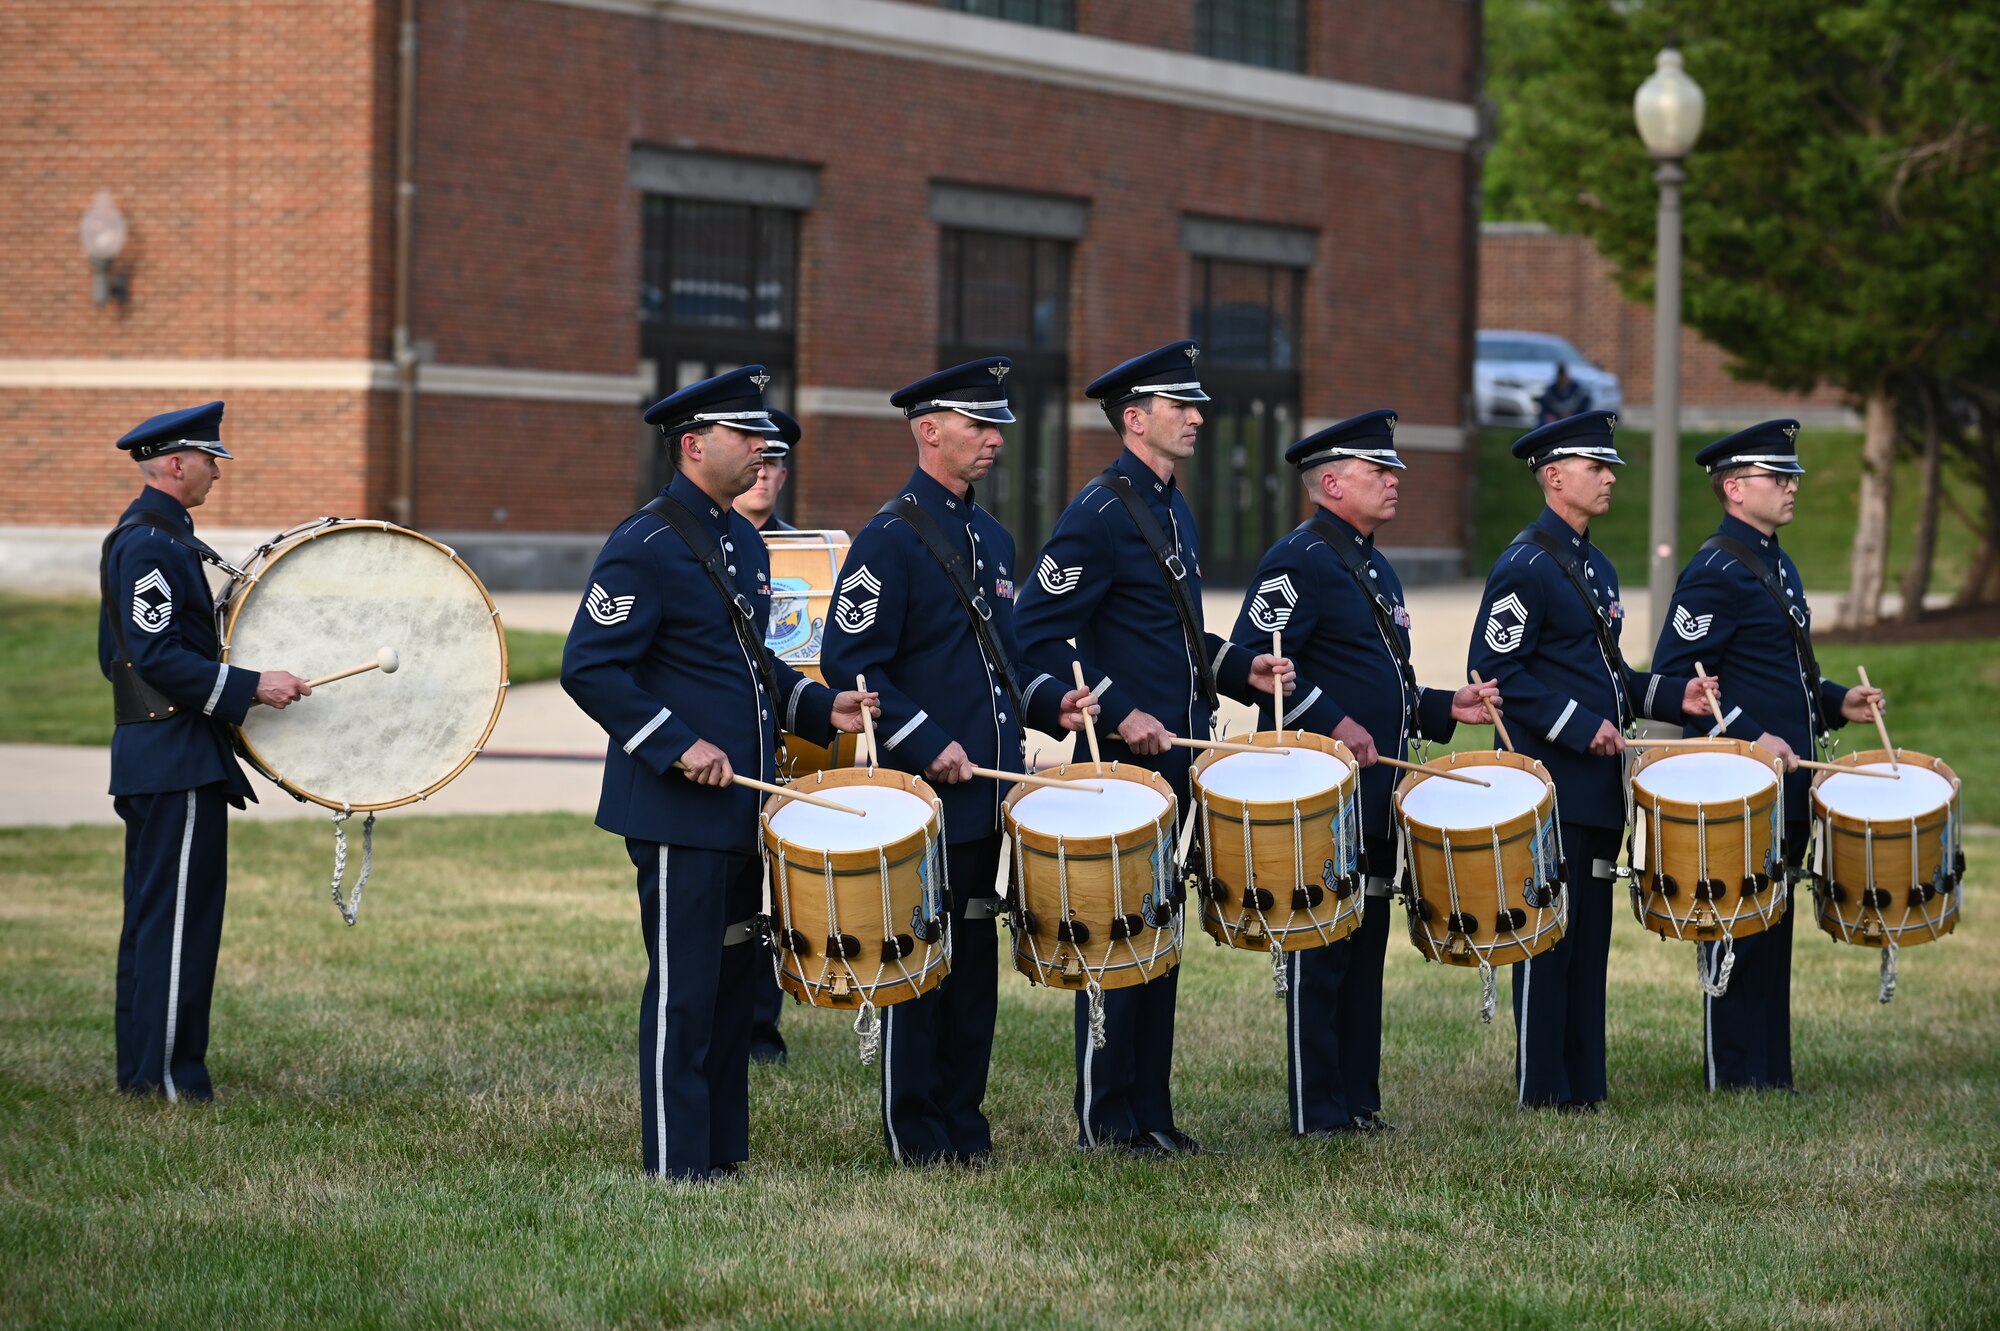 Percussionists of The United States Air Force Band perform during the U.S. Air Force’s 75th Birthday Celebration Spring Tattoo on Joint Base Anacostia-Bolling, Washington, D.C., May 3, 2022. Through world-class musical presentations and ceremonies, The U.S. Air Force Band helps create bonds between the United States and the worldwide community. Using music to bridge language, cultural, societal and socio-economic differences, the Band's performances advance international relationships and inspire positive and long-lasting impressions of the U.S. Air Force and the United States of America. (U.S. Air Force photo by Airman 1st Class Anna Smith)